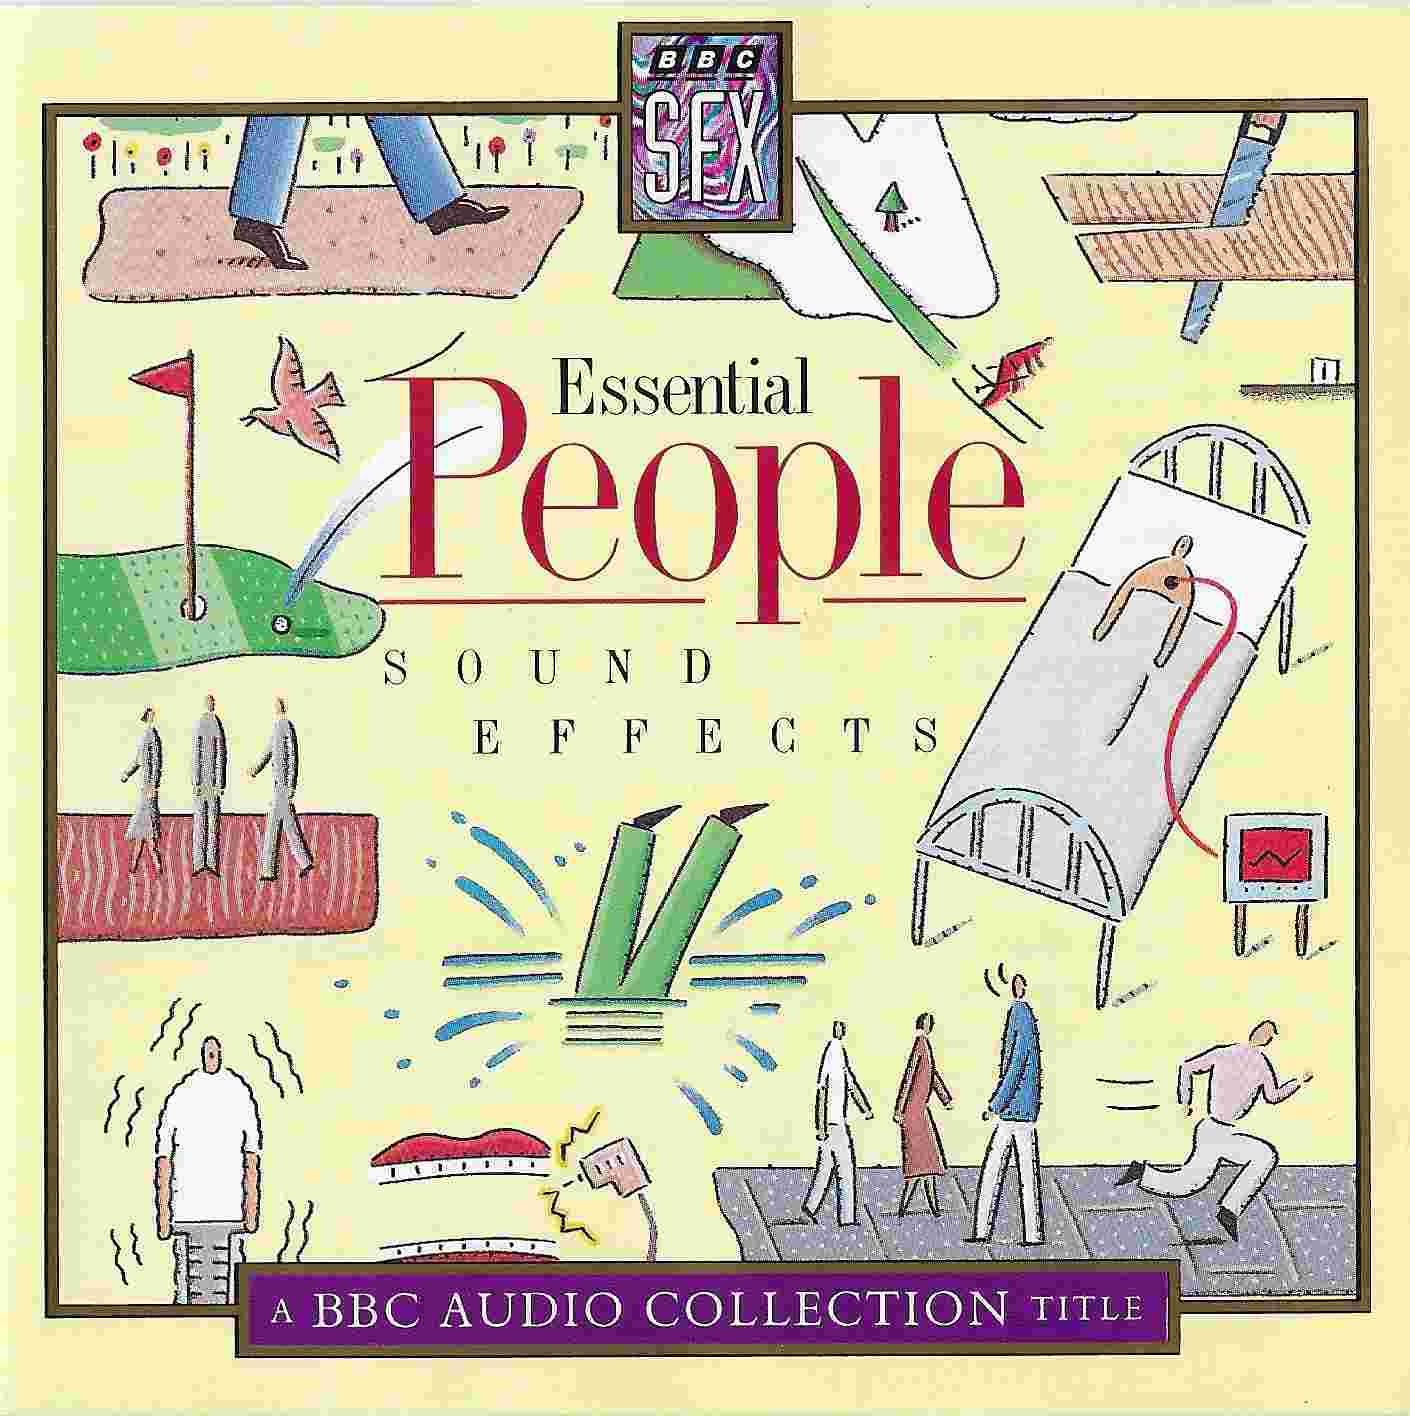 Picture of BBCCD863 Essential people sound effects by artist Various from the BBC cds - Records and Tapes library